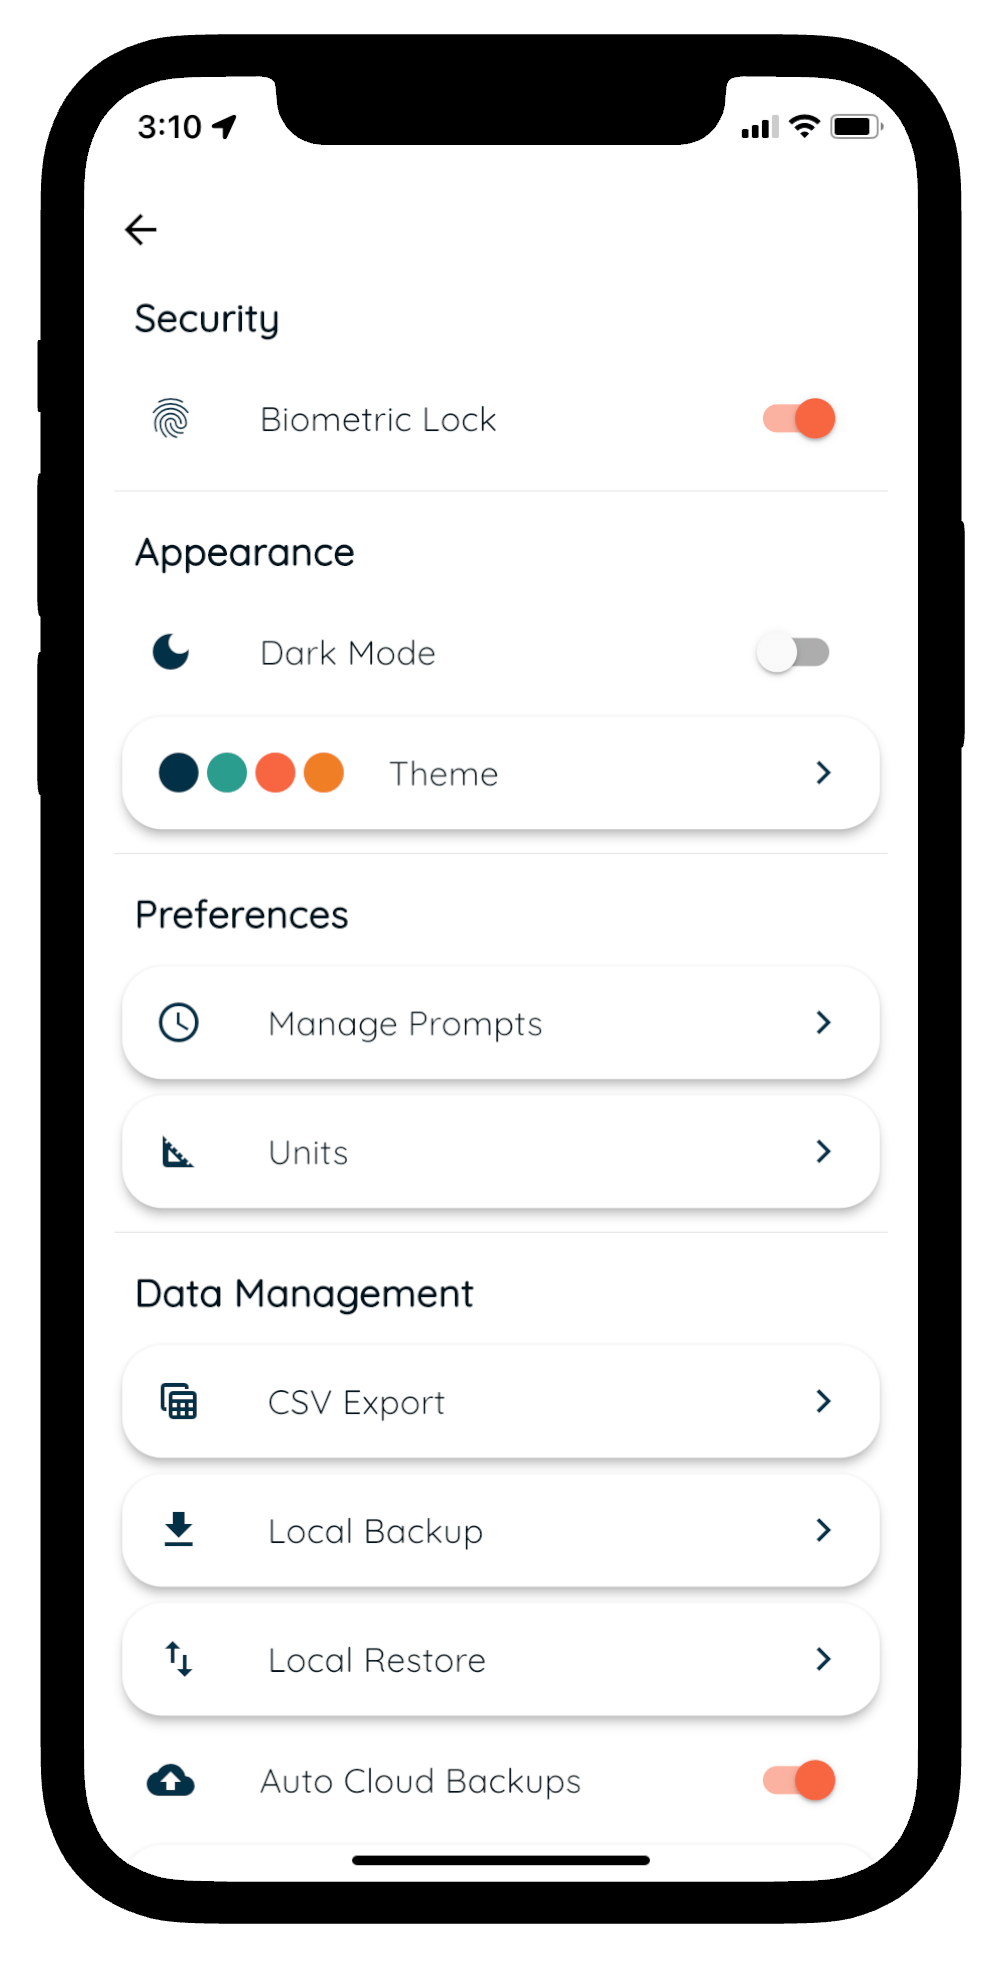 Habit tracking app settings screen with privacy features like a biometric lock and local data storage